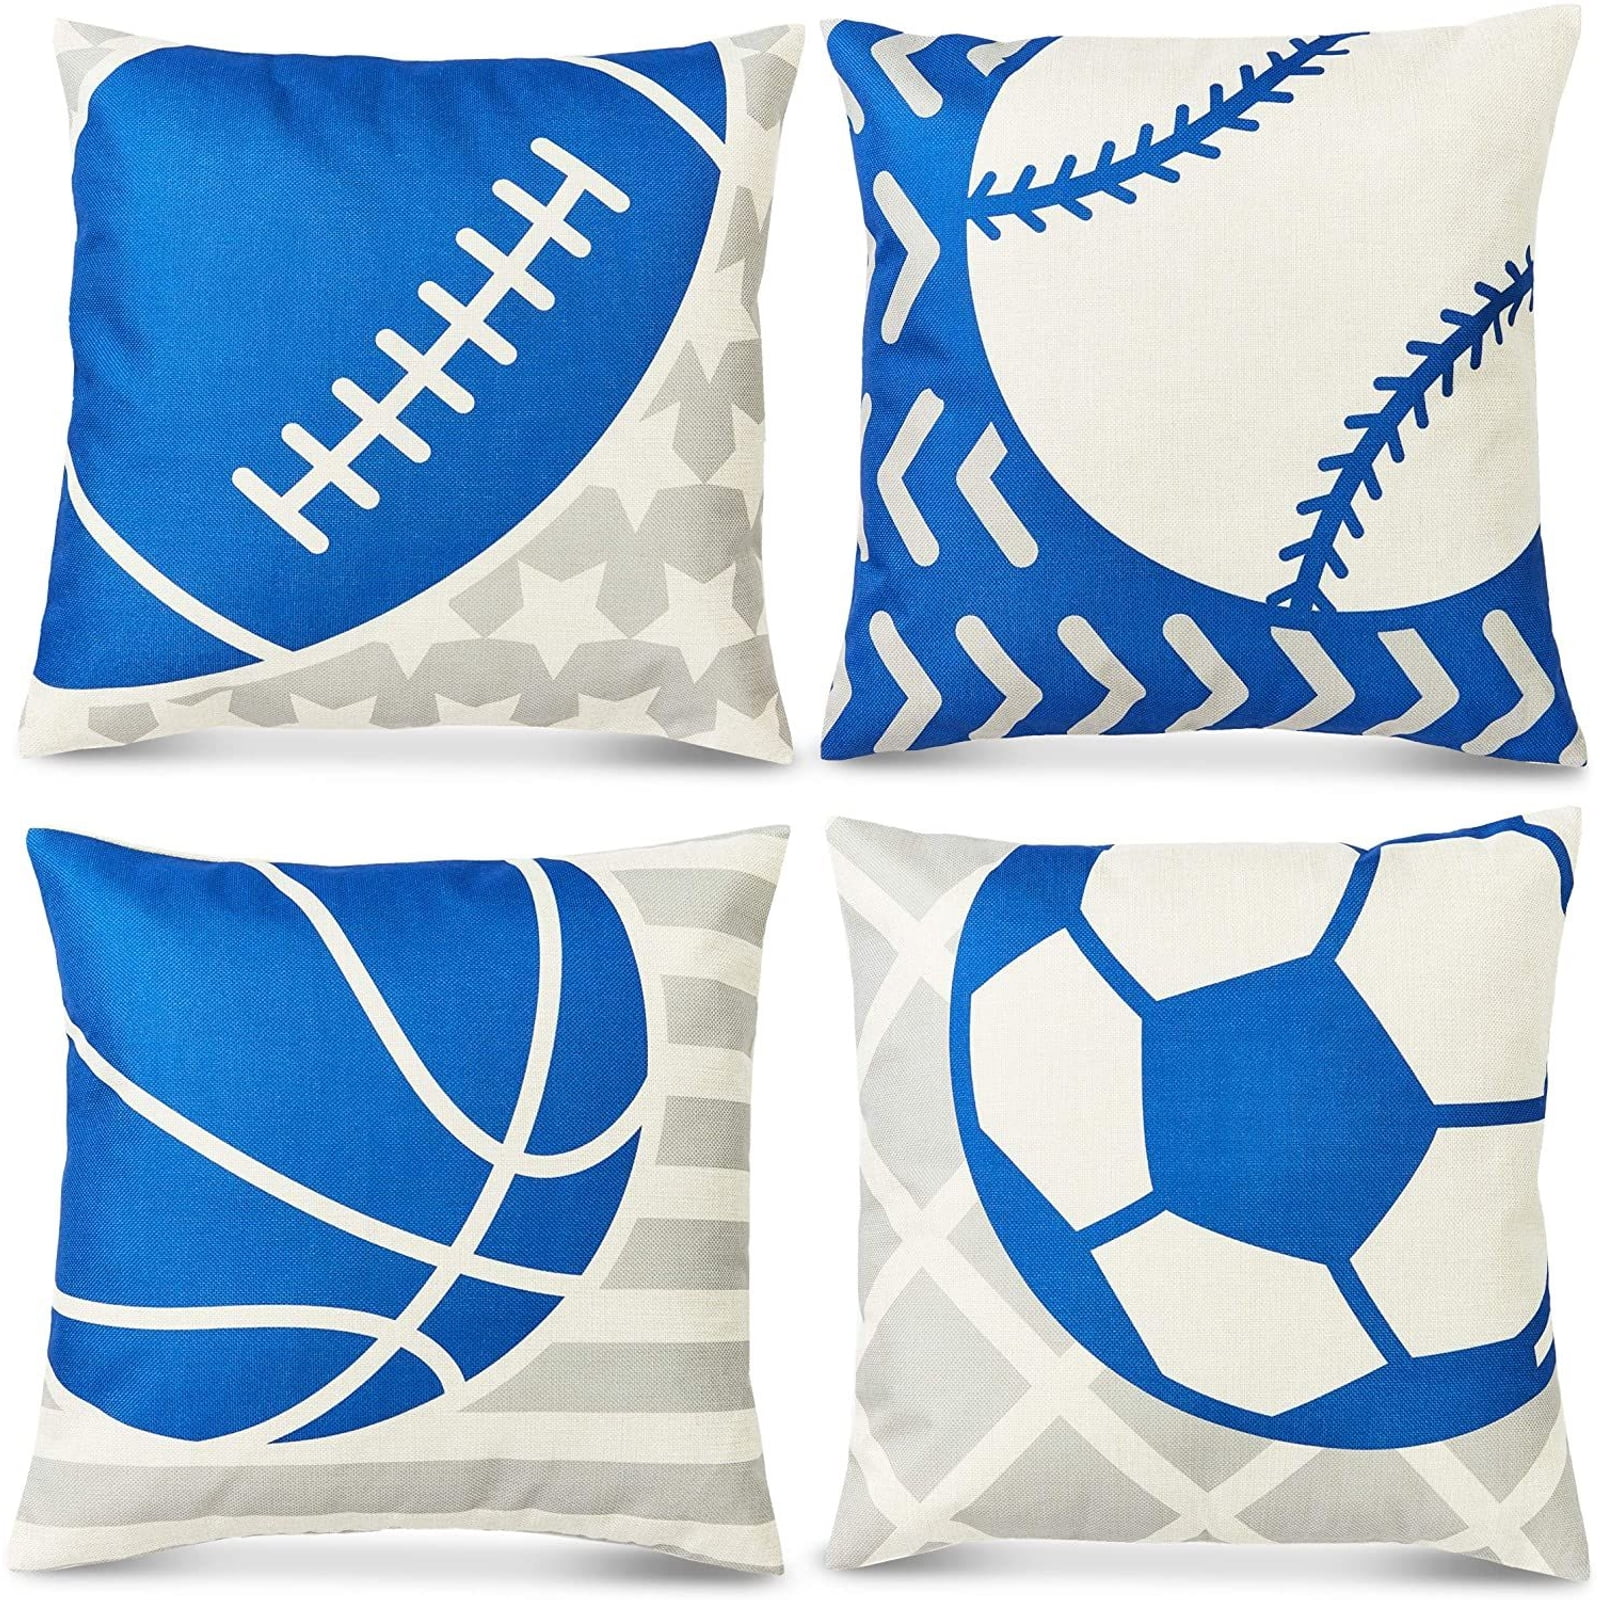 All Smiles Fun Ocean Throw Pillow Covers for Cute Kids & You Sea Home Decor Blue Coastal Cushion Cases 18x18 Nautical Decorative Pillowcases Set of 4 for Couch Bed Sofa 